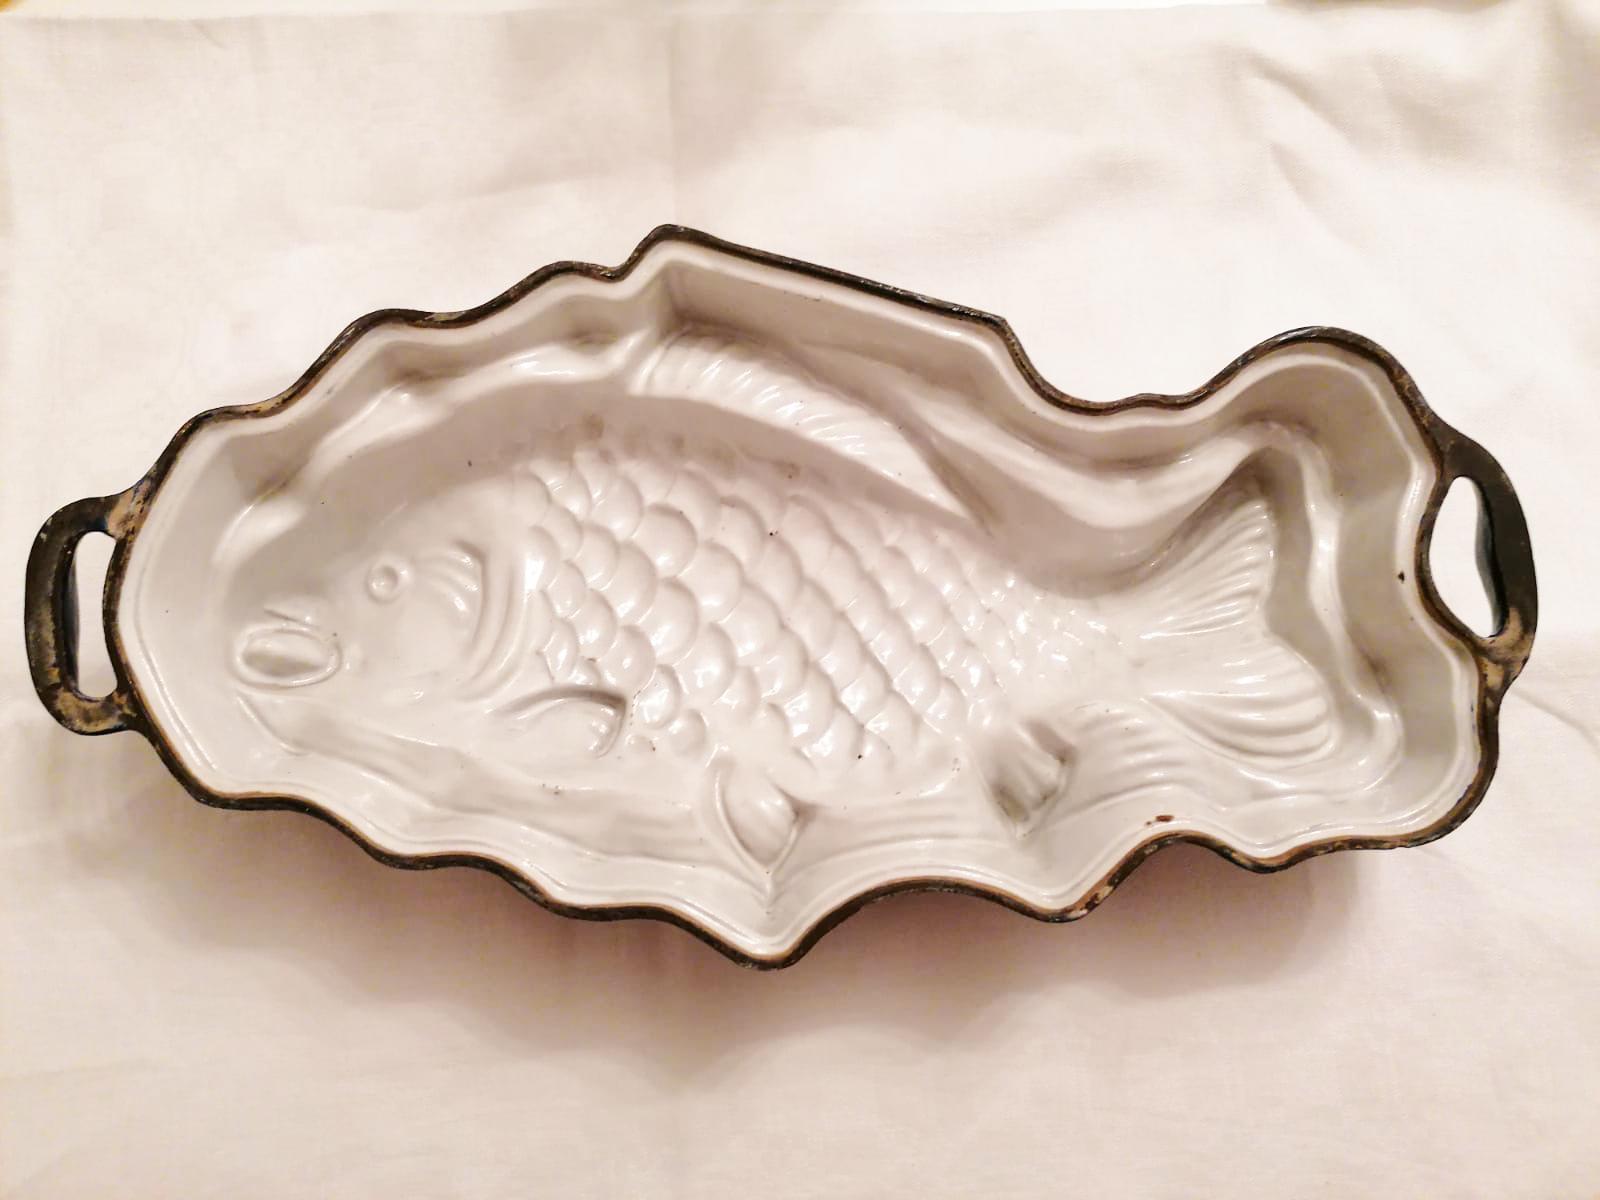 Cast iron in a shape of a fish enameled marine blue outside and white inside. Made in France, circa 1900. Beautiful original condition.